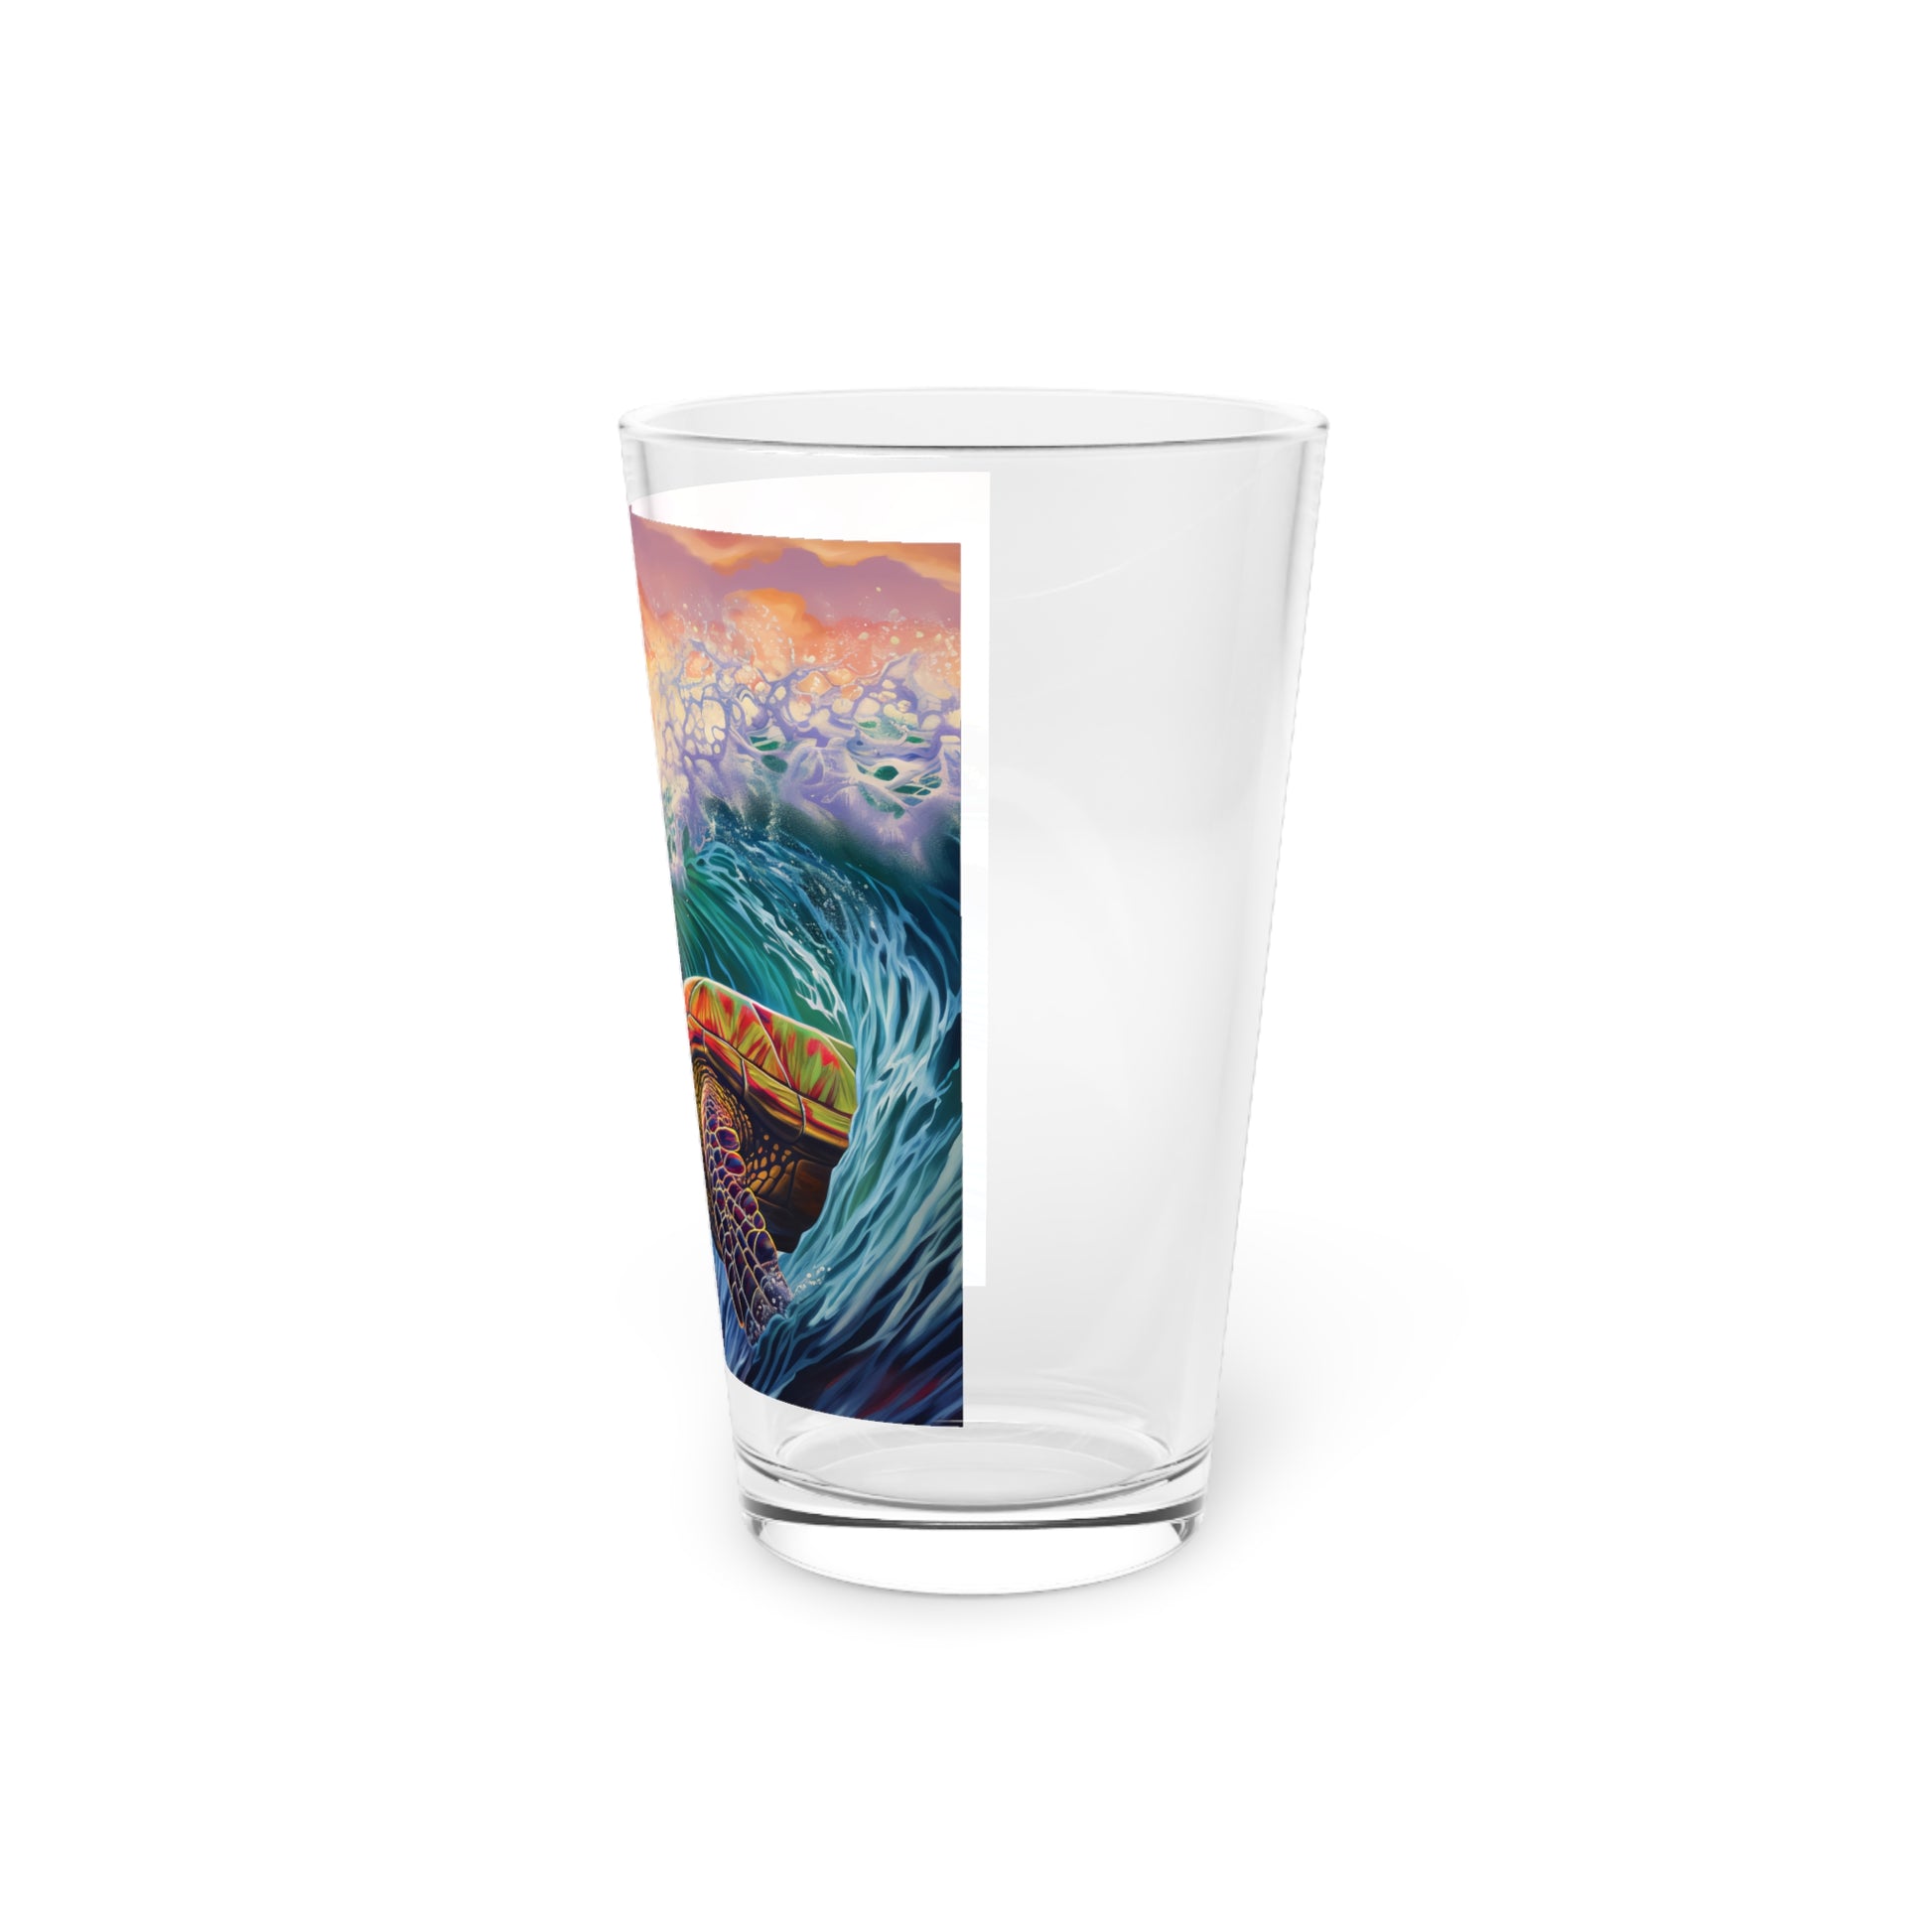 Experience the allure of Hawaiian waters with our Turtle Surfing Waves Pint Glass. Waves Design #009 graces this 16oz glass, exclusively crafted by Stashbox, capturing the grace of turtles riding the vibrant waves.